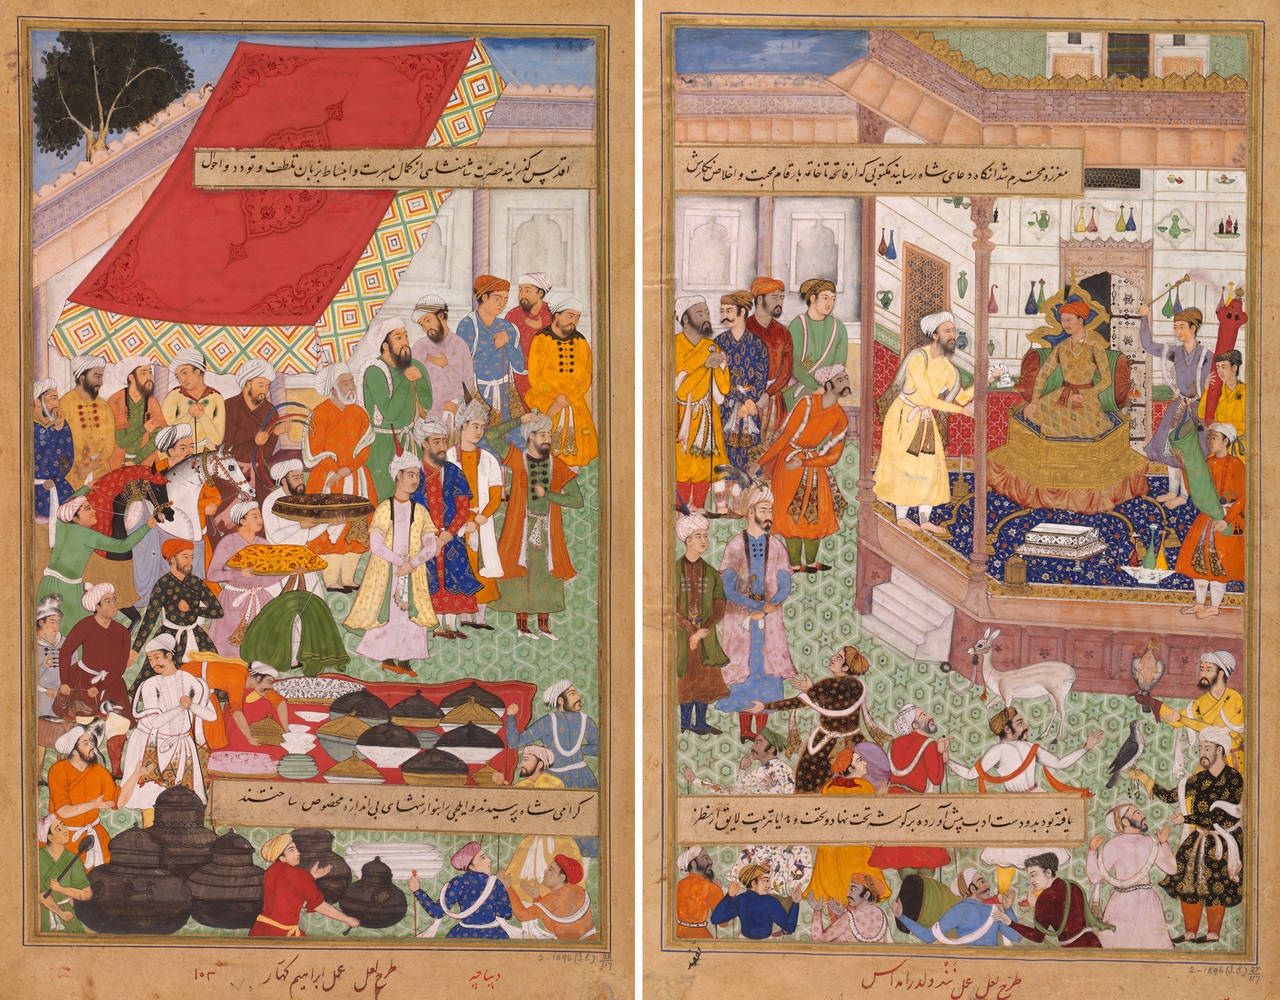 On the Lapidary Arts in the Mughal Empire: Read an excerpt from the book “Reflections on Mughal Art and Culture”